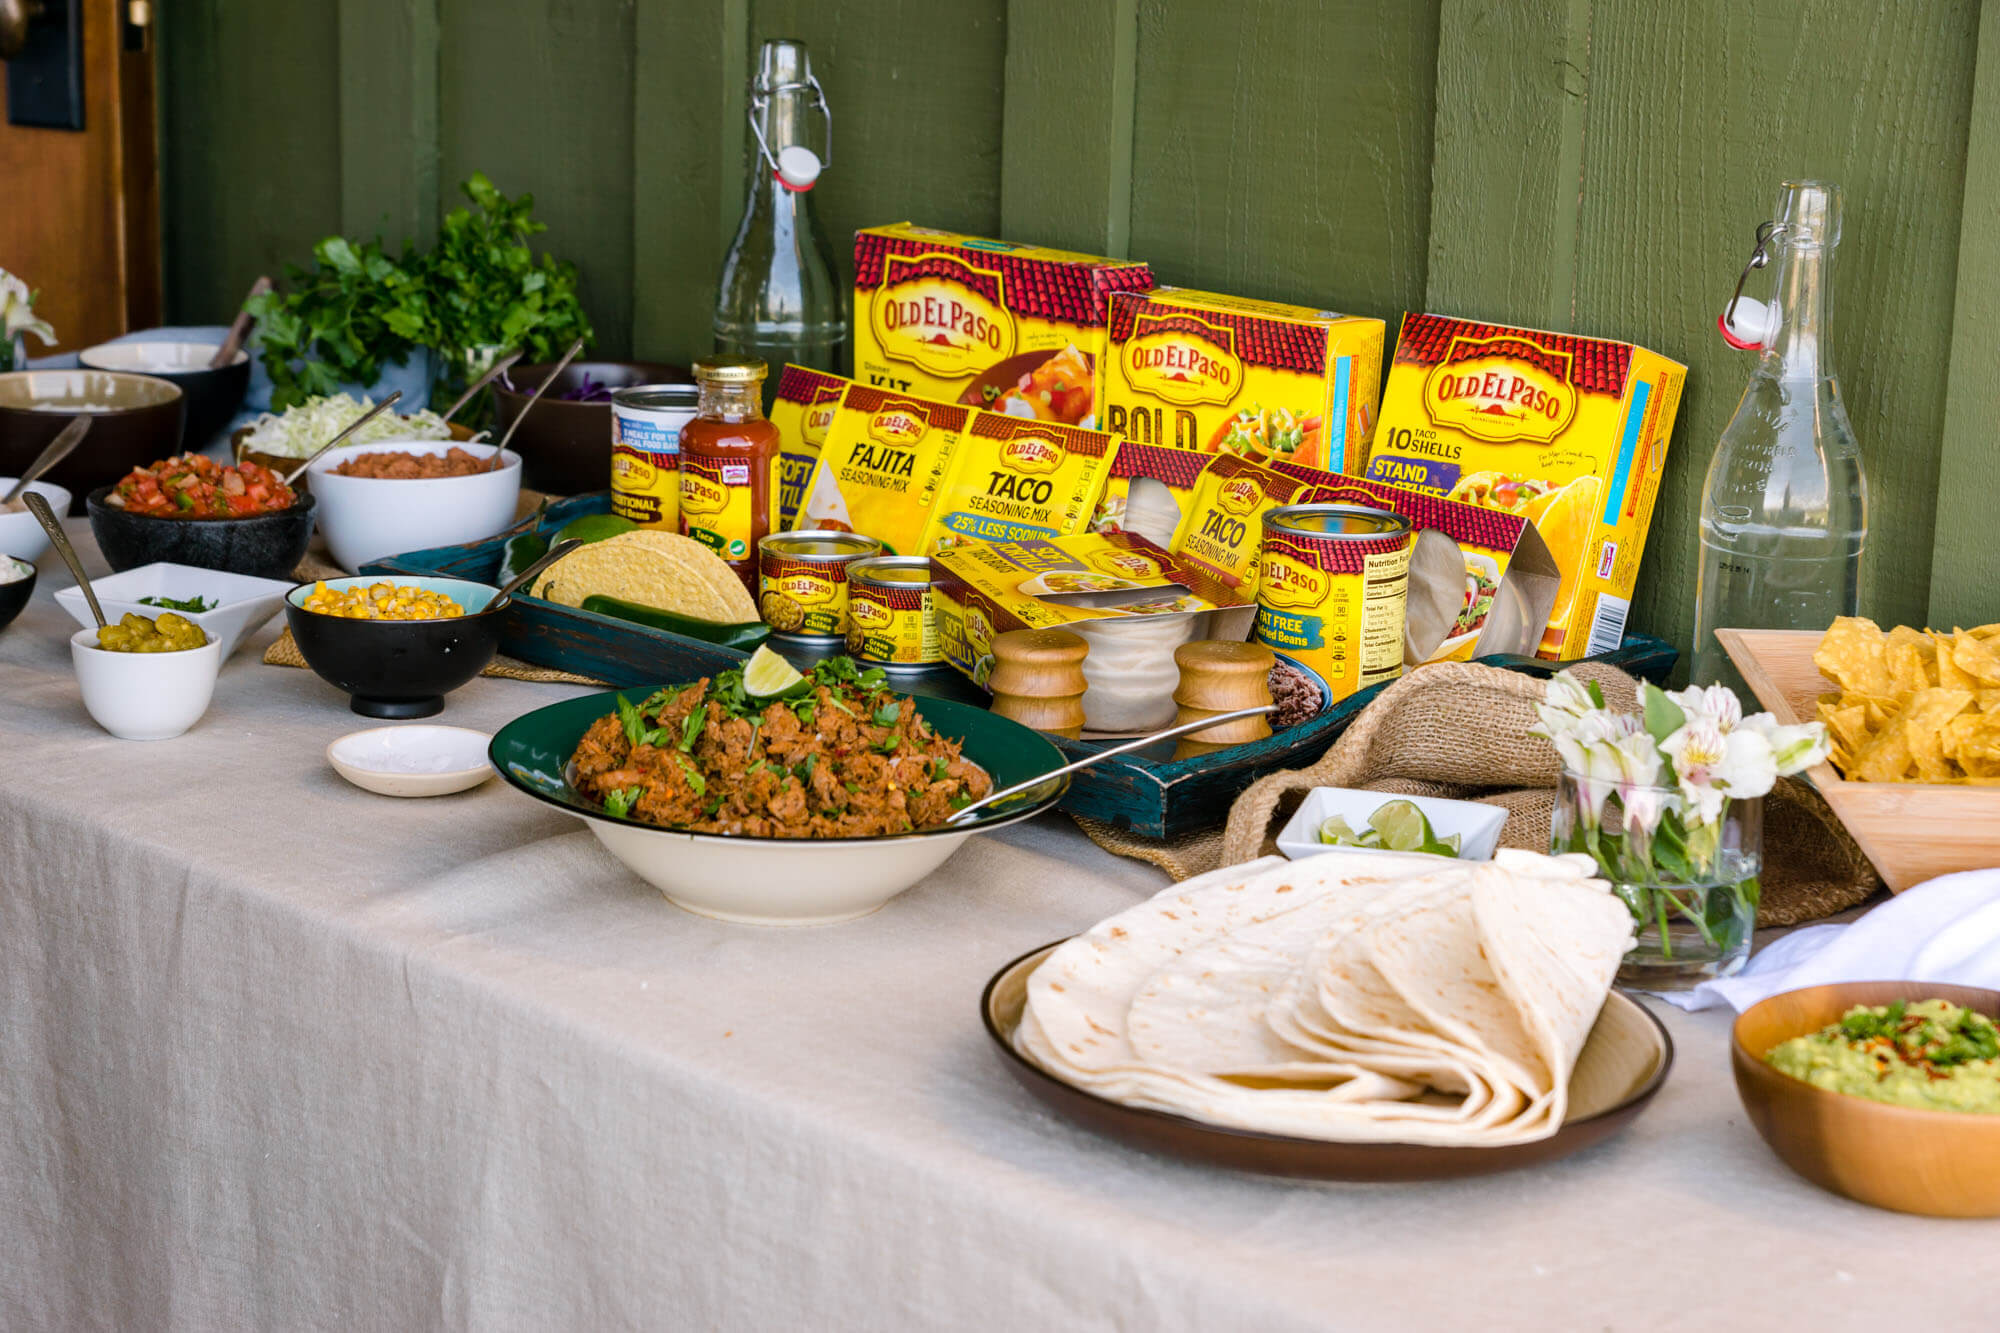 A healthy taco bar is an easy recipe for a weekend party. Use fresh ingredients & simple touches to turn a rustic taco bar into an elegant lunch buffet.